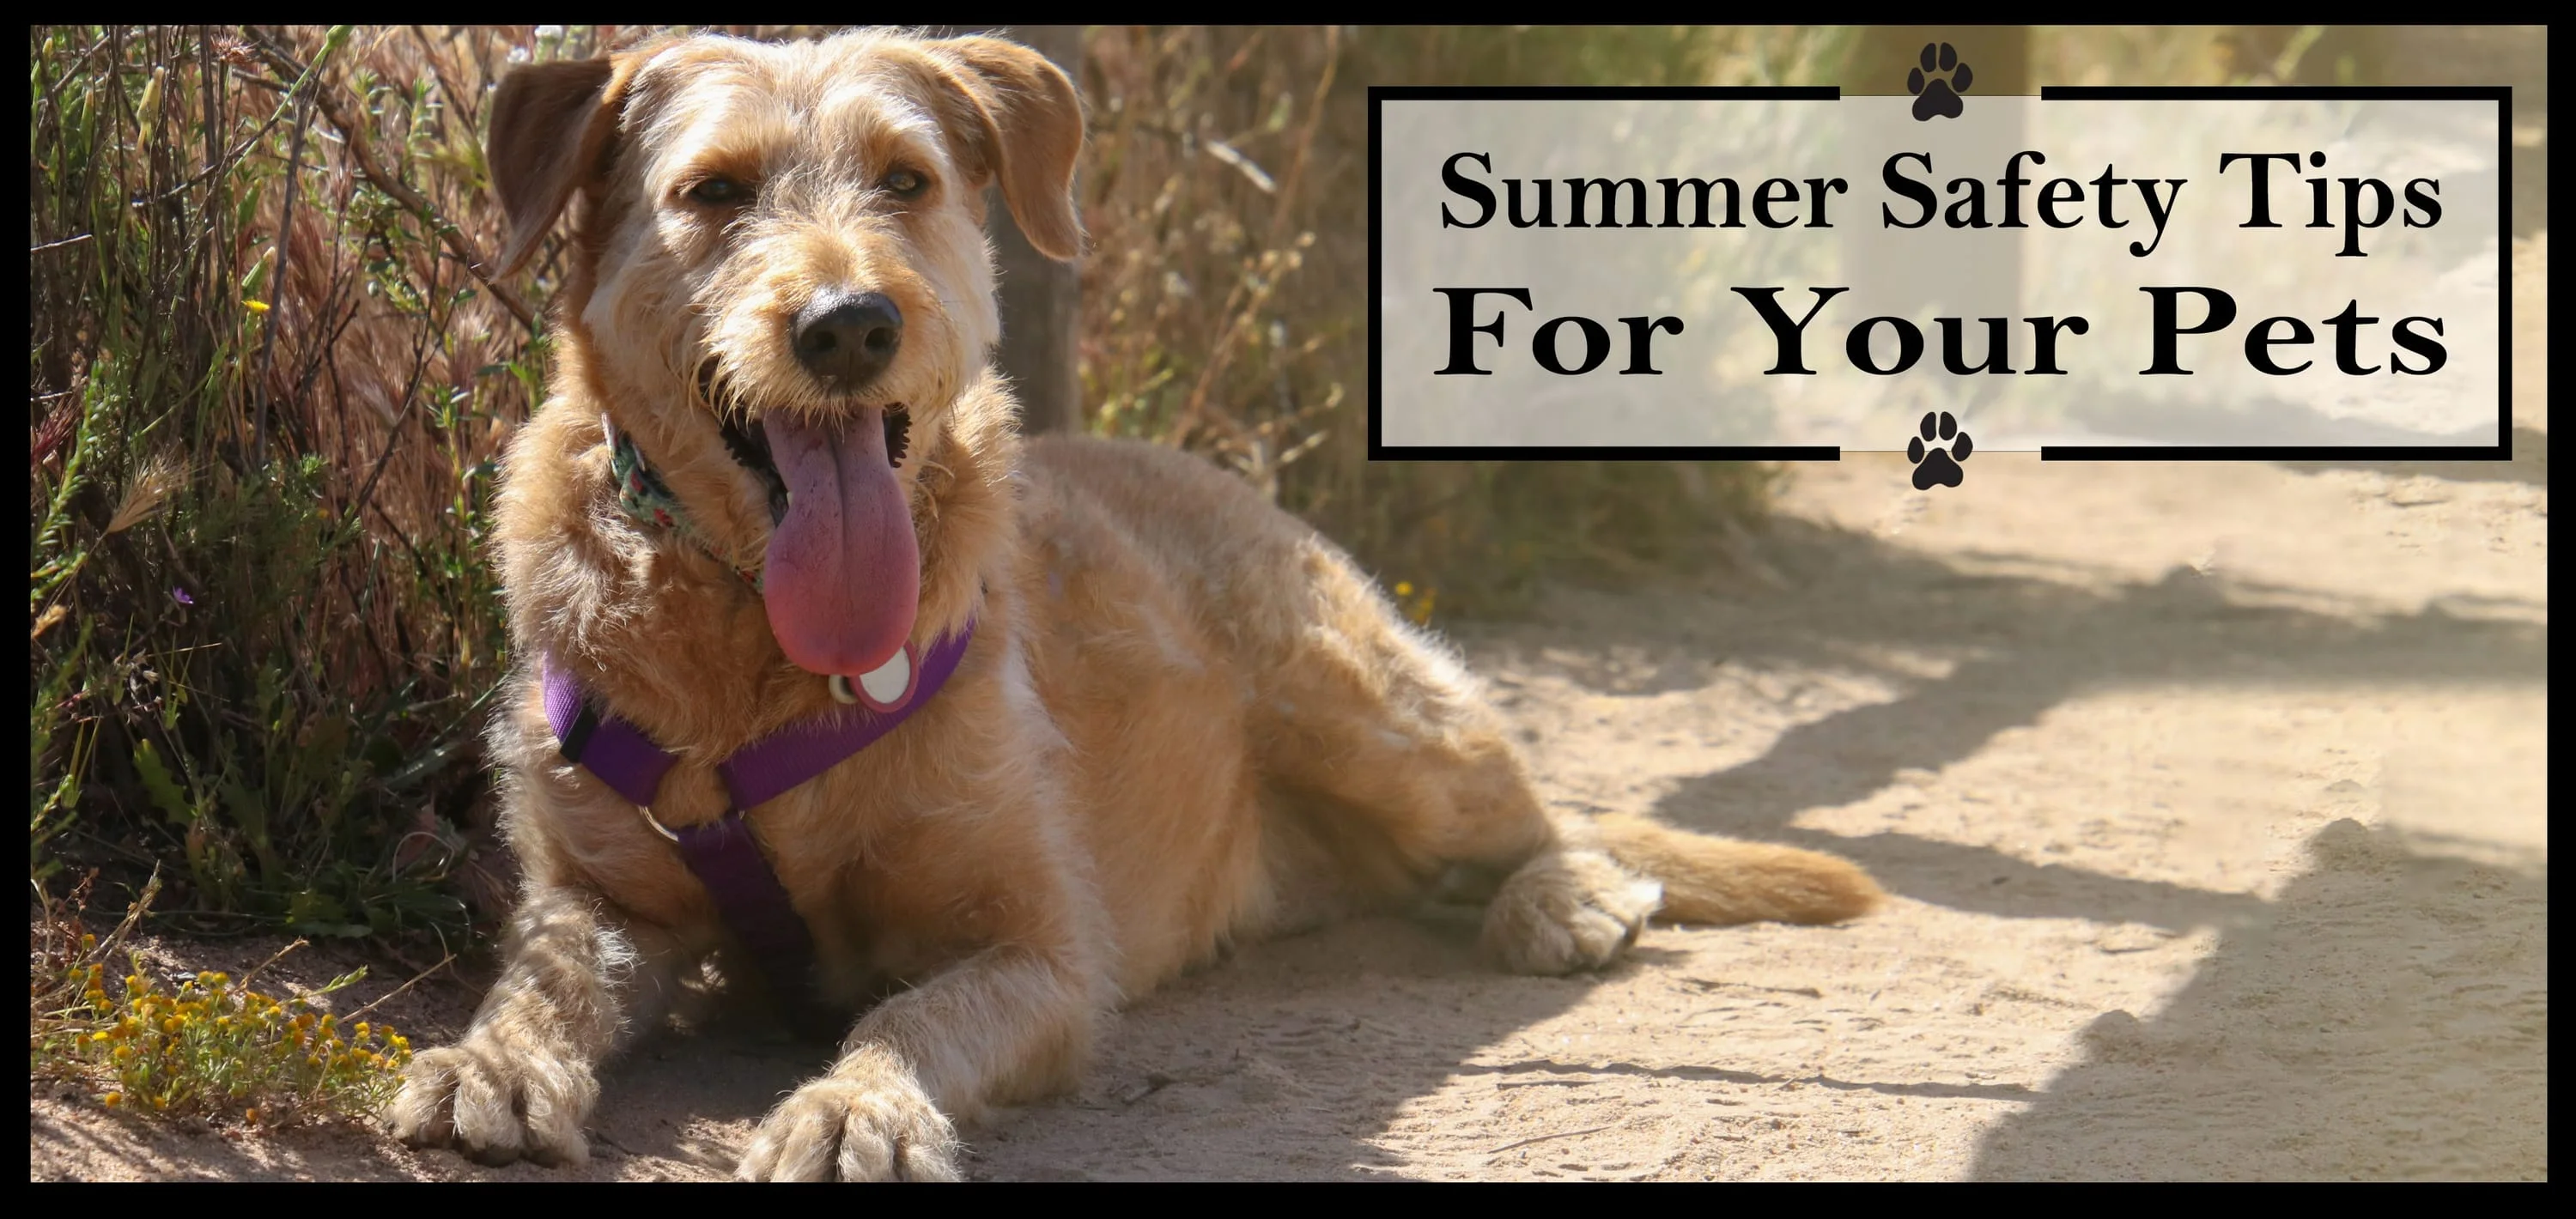 Summer Safety Tips for your Pets